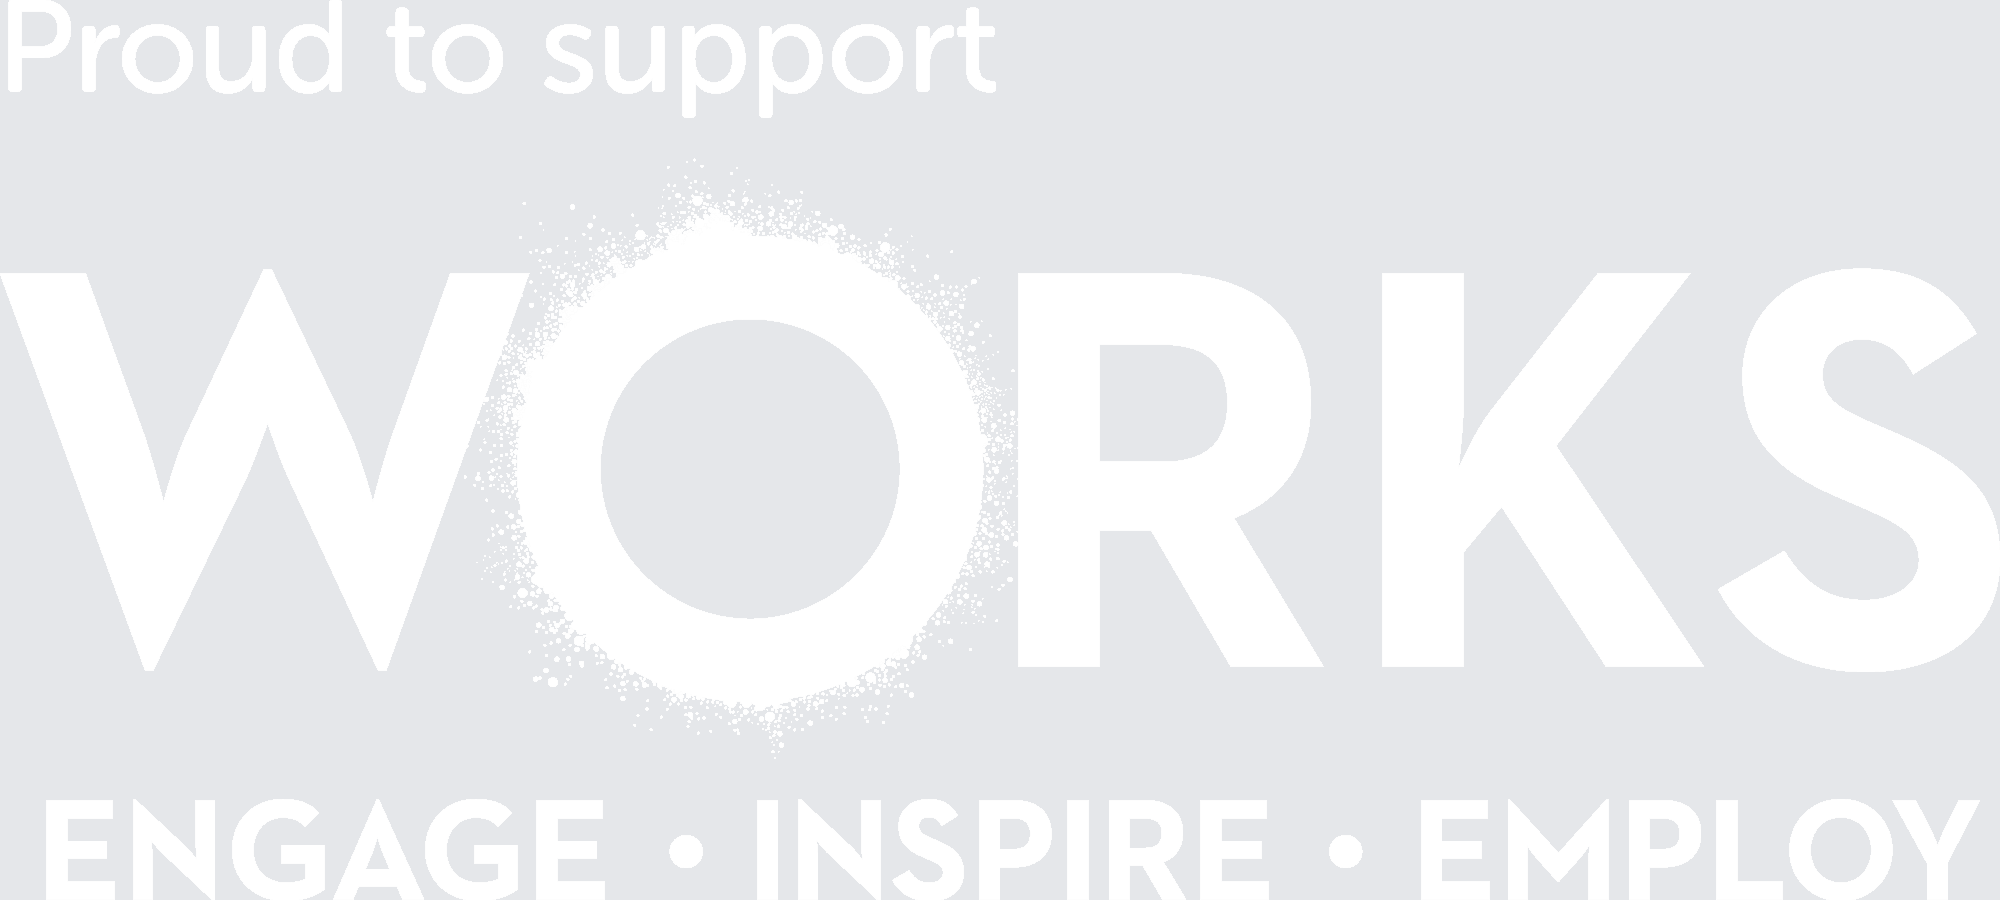 WORKS Proud to support - white (transparent) logo